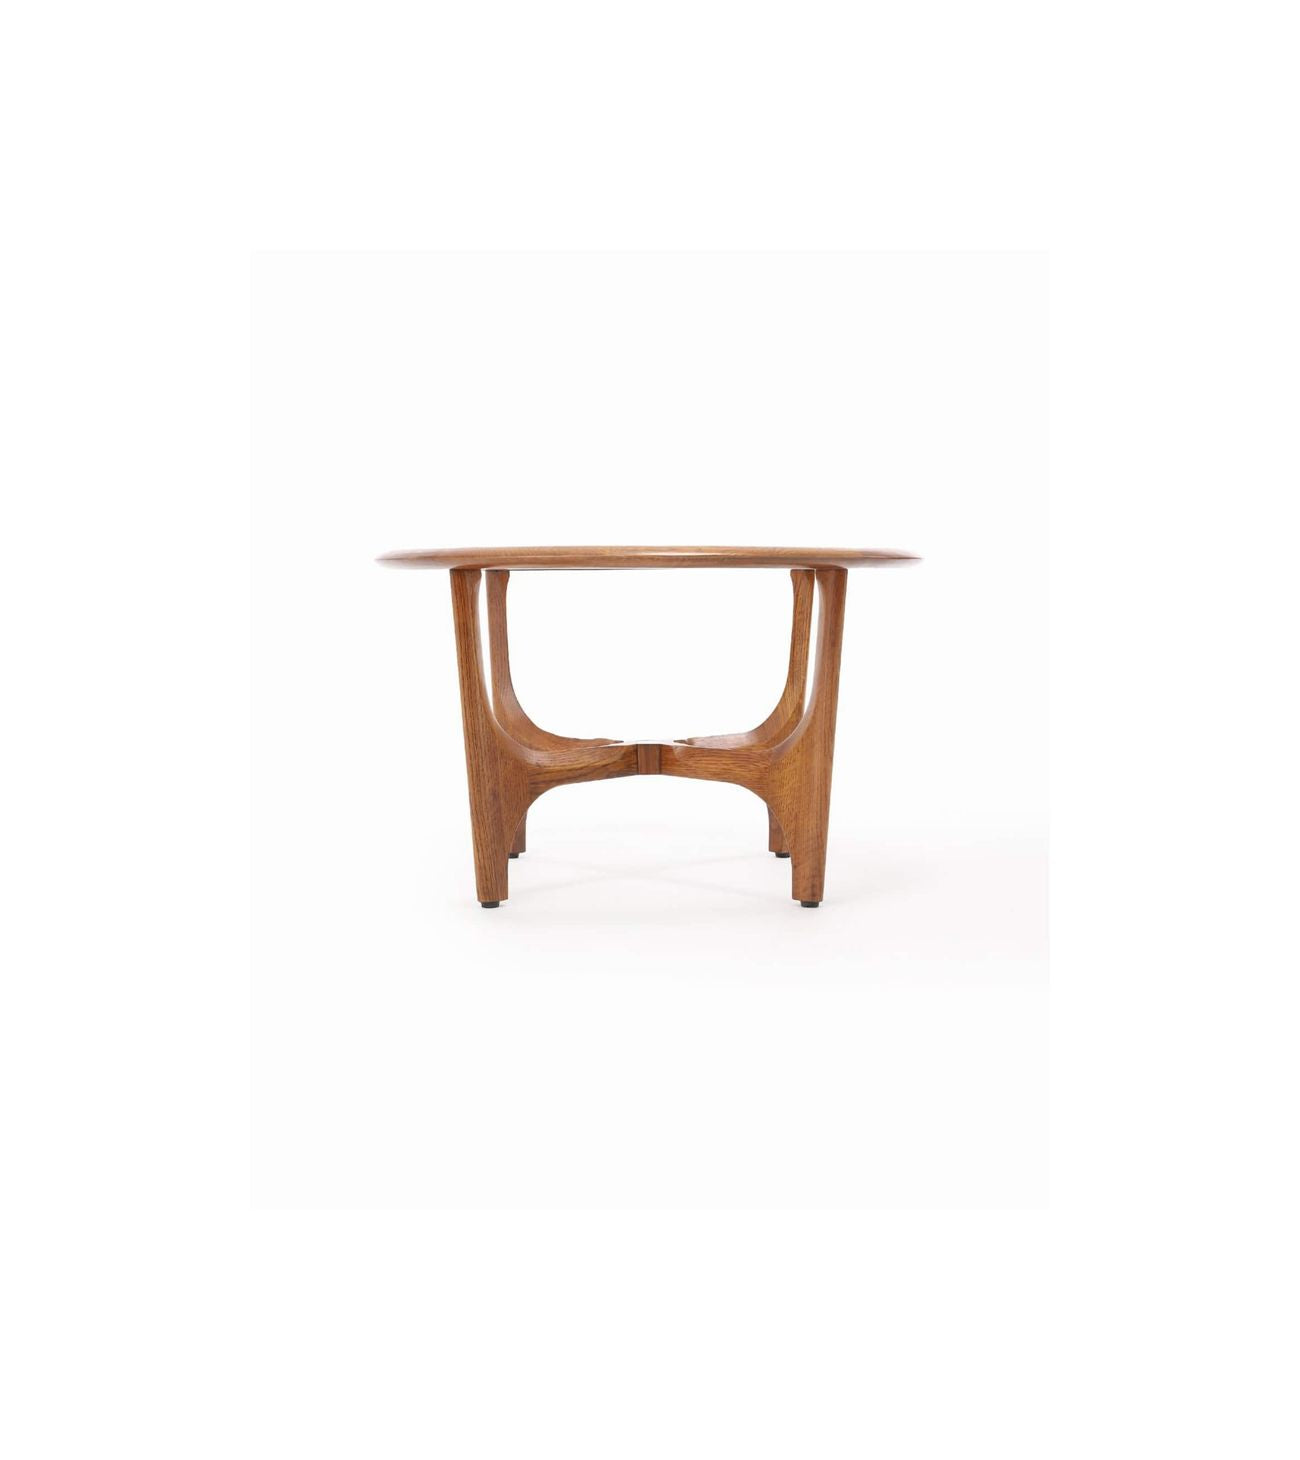 SILHOUETTE CENTER TABLE　